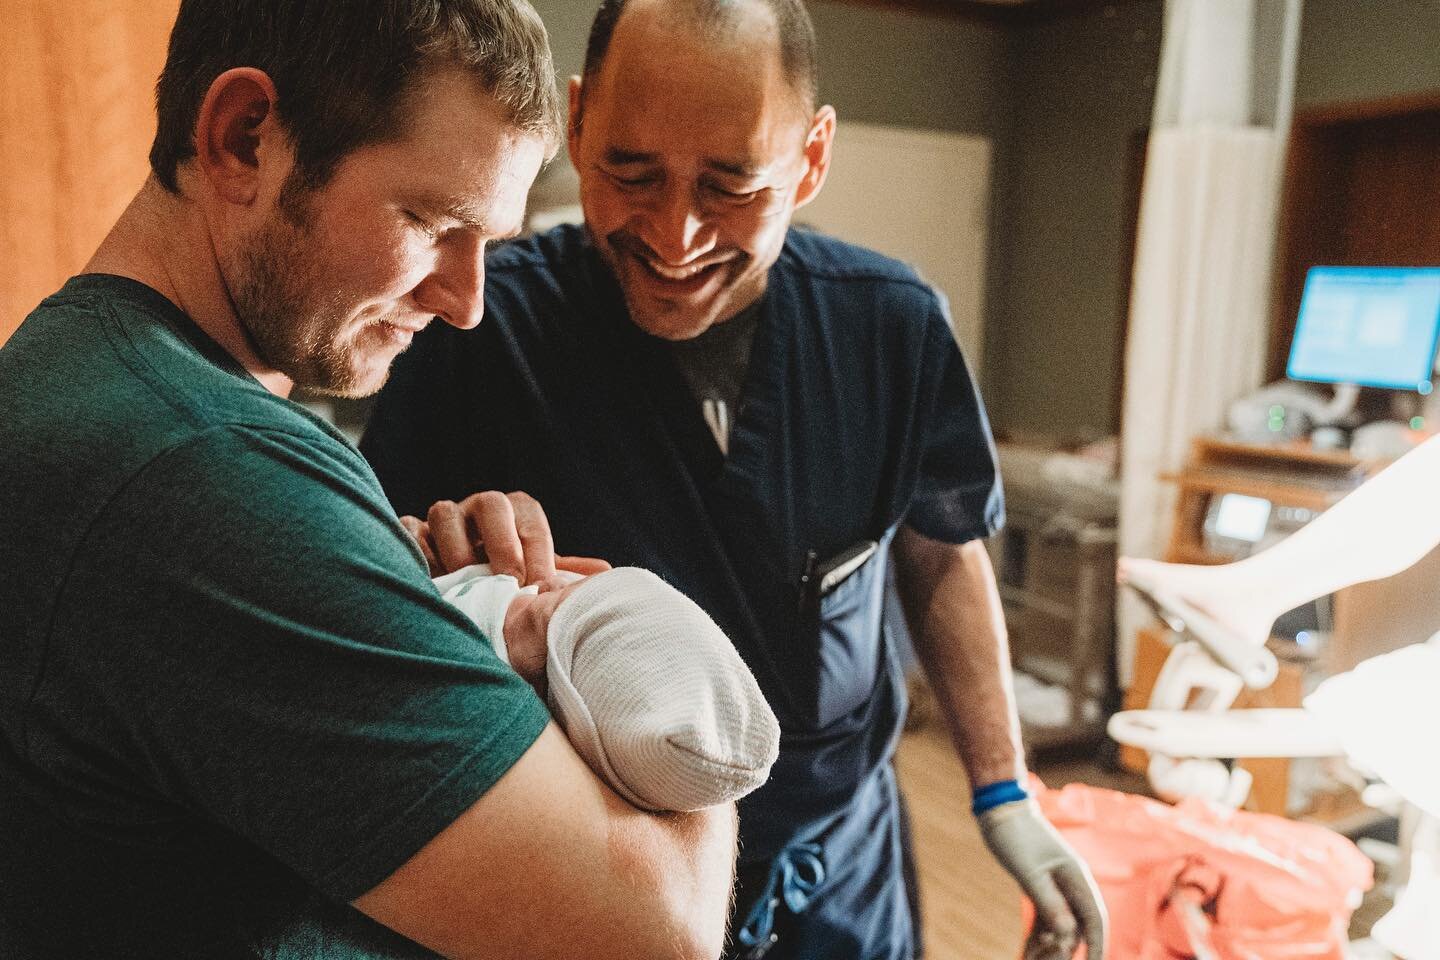 E M B R A C E - one of my favorite moments of 2020 just before our world was flipped upside down. New baby, elated father of now two beautiful girls, and the doctor who helped these parents dreams come true. This doctor is the truest example of &ldqu